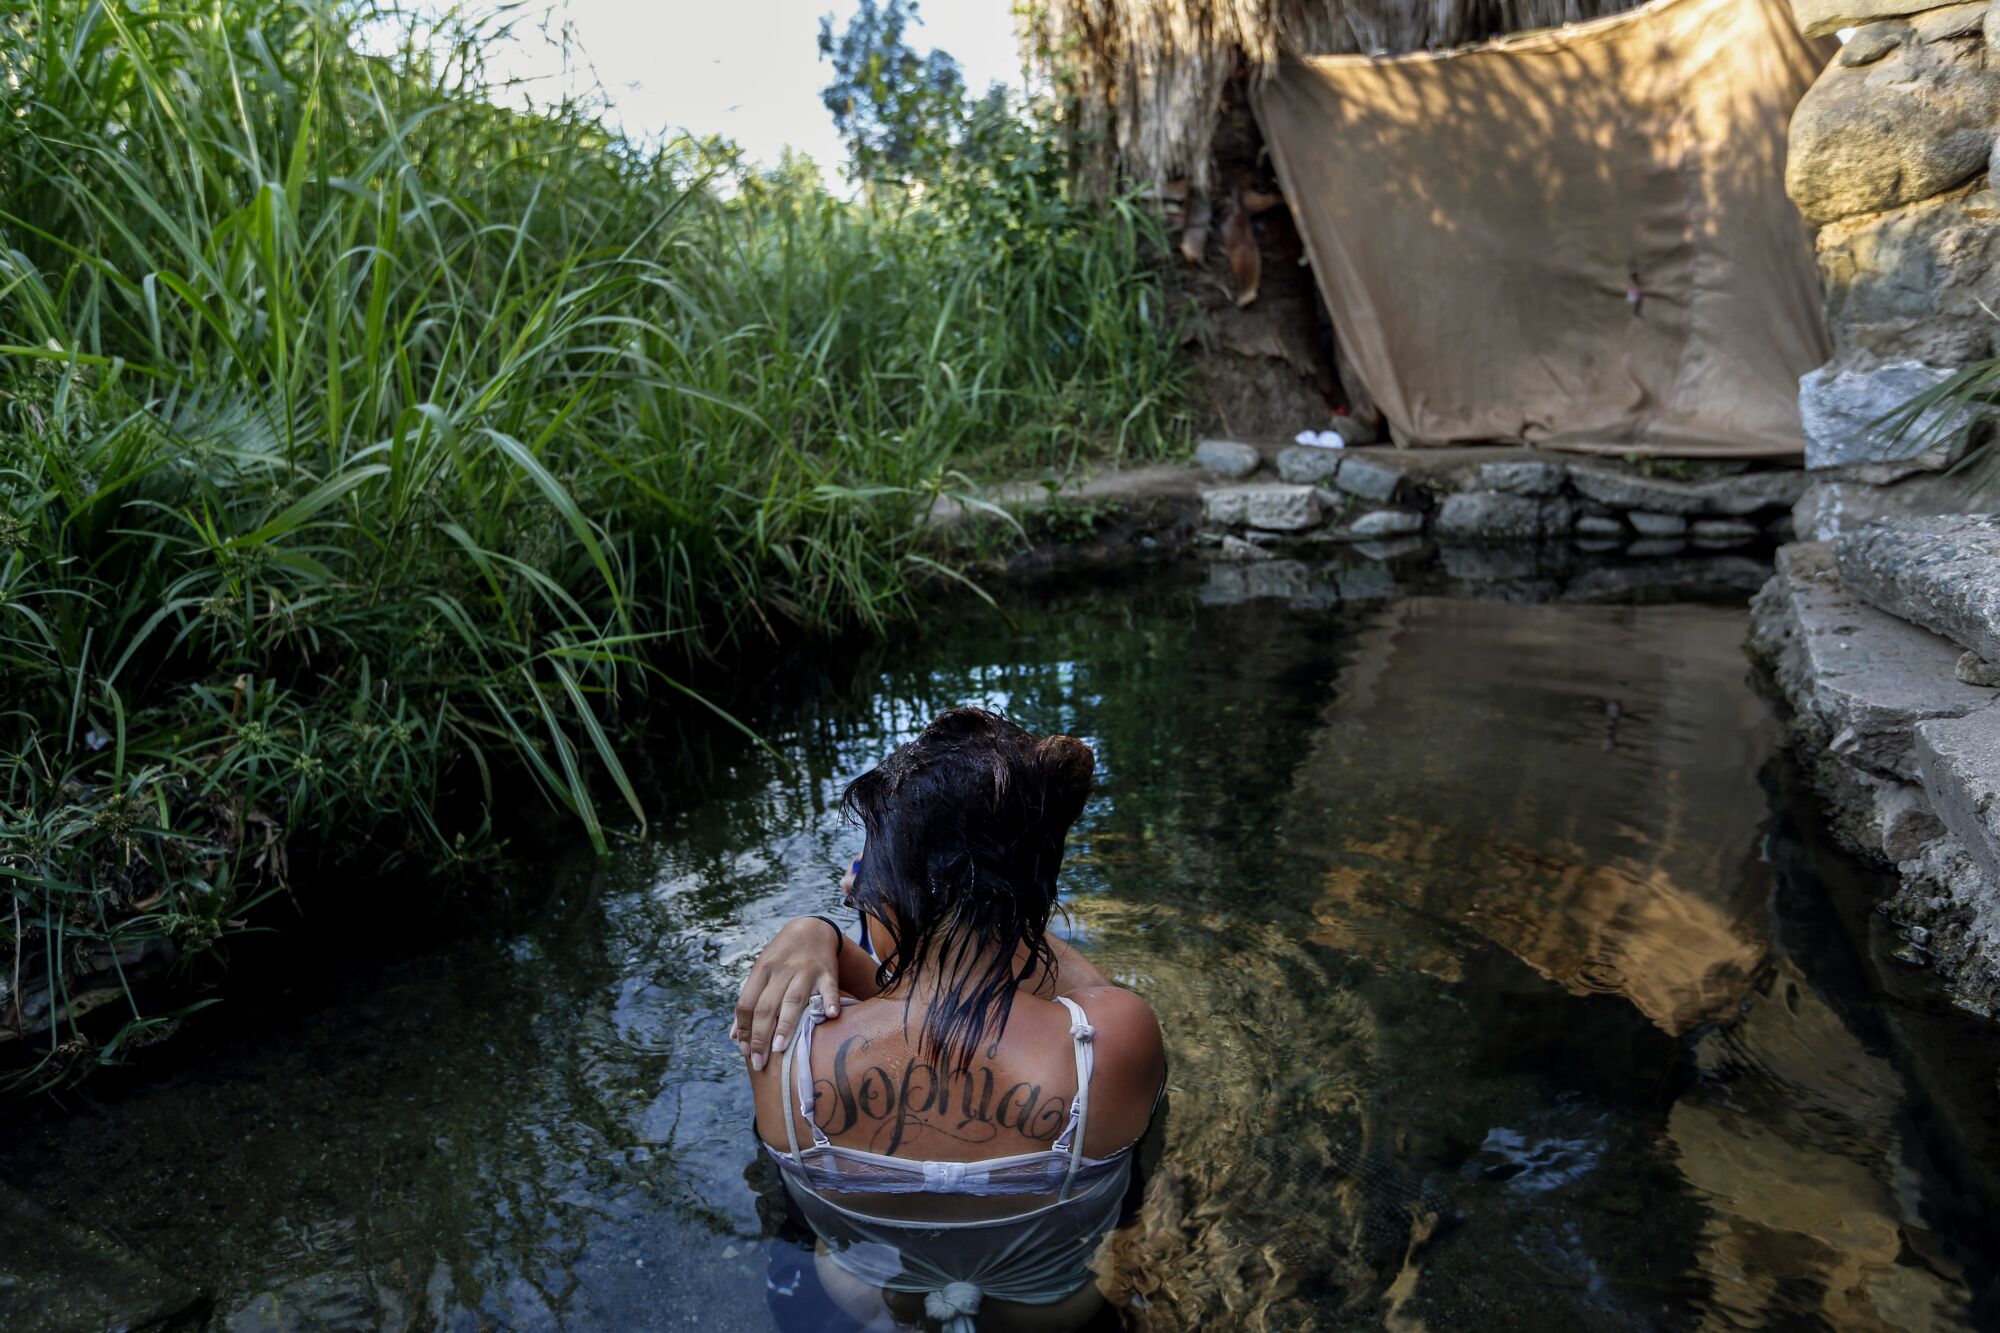 A woman soaking in a pond is seen from behind